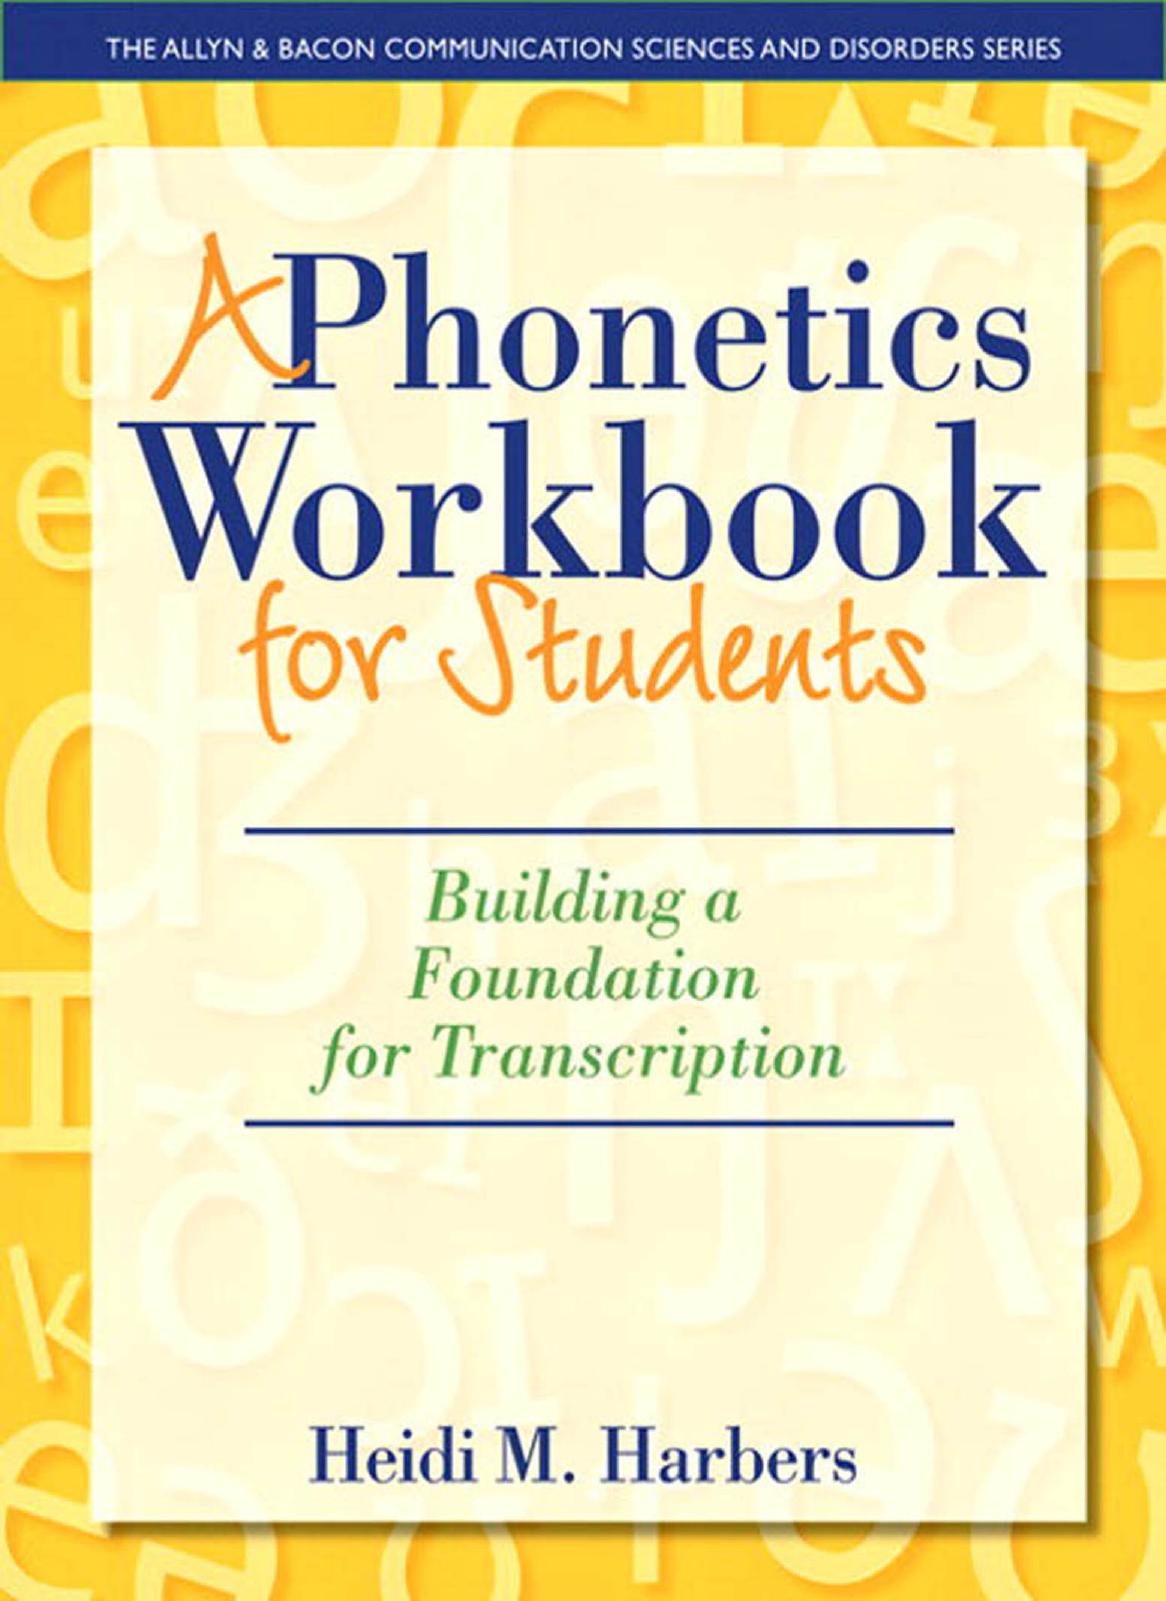 A Phonetics Workbook for Students: Building a Foundation for Transcription by Heidi M. Harbers